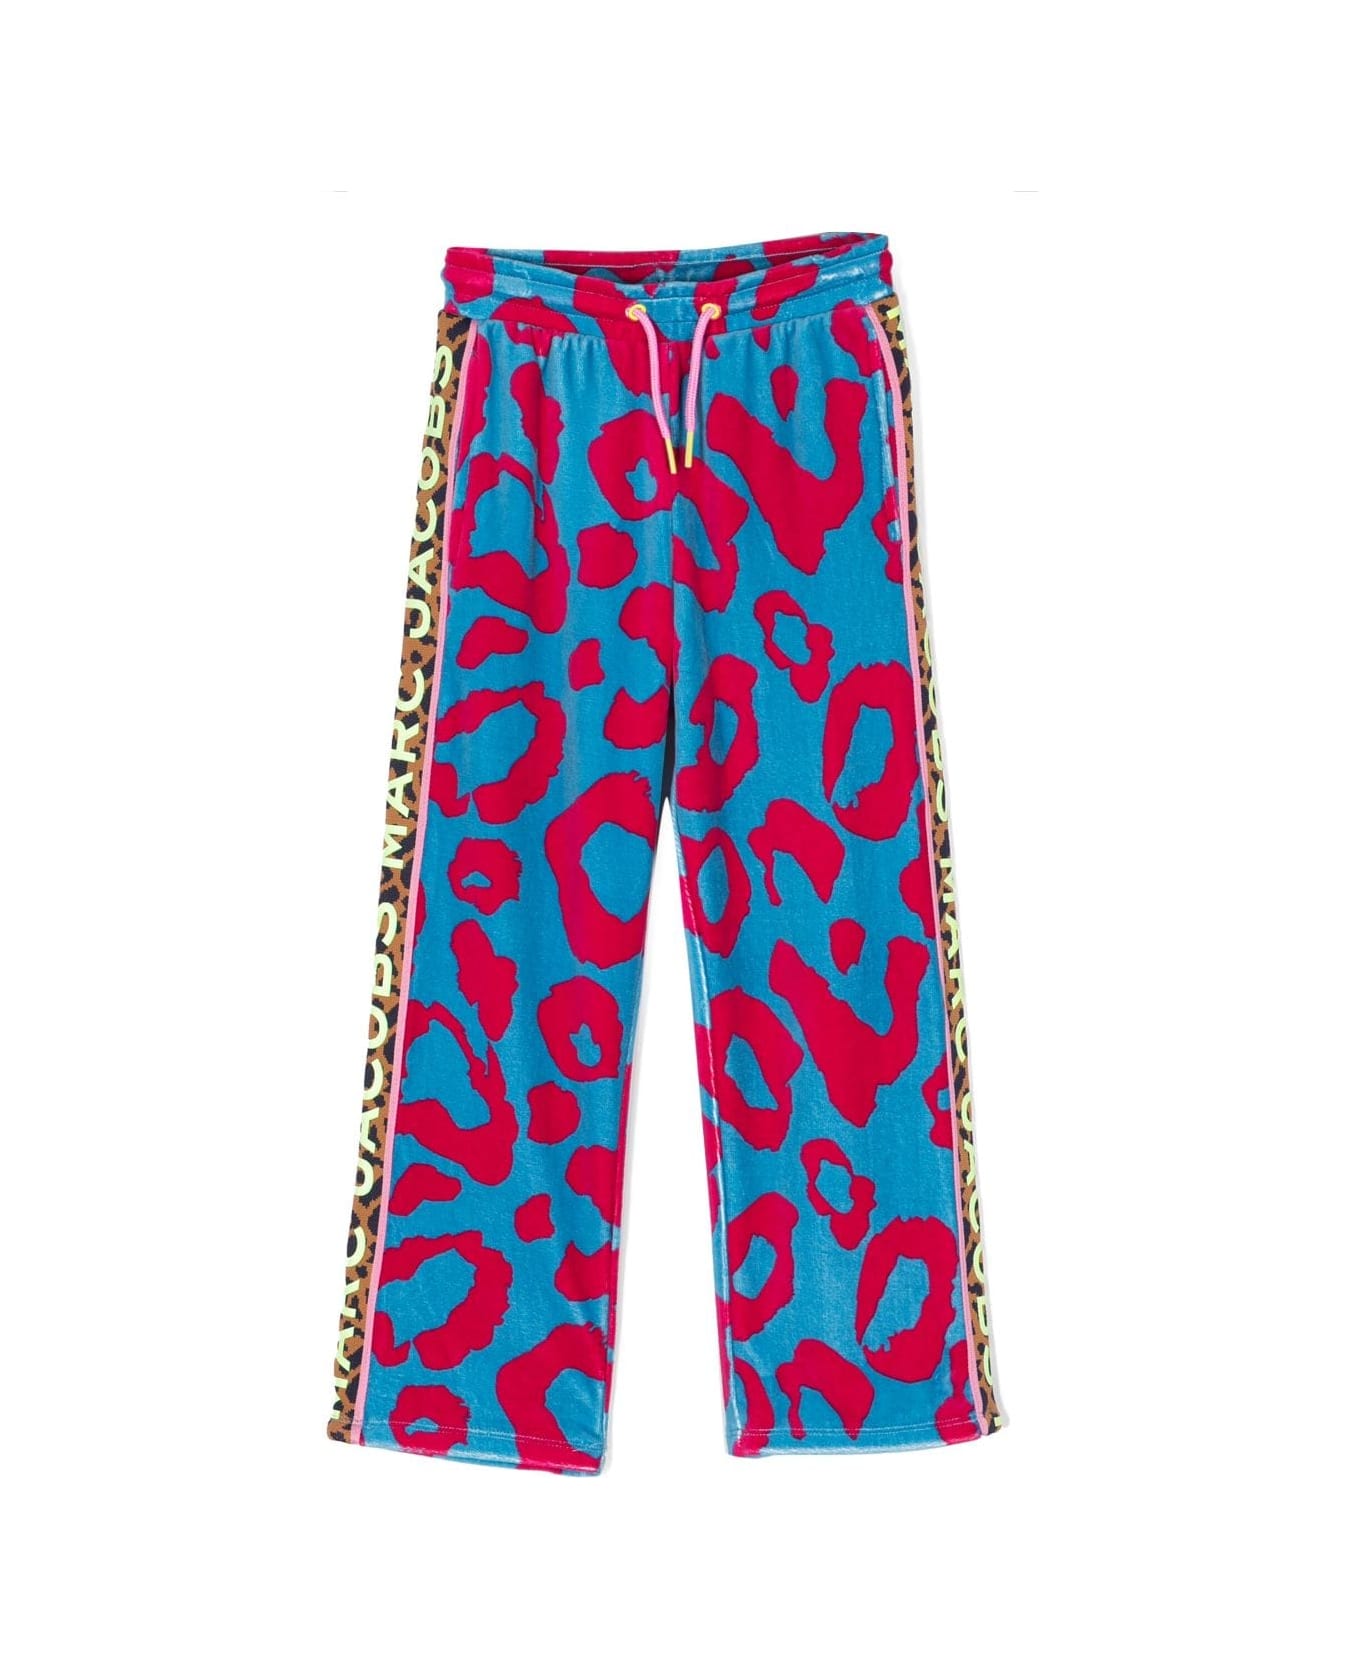 Little Marc Jacobs Marc Jacobs Pantaloni Stampa Animalier In Pile Bambina - Stampa